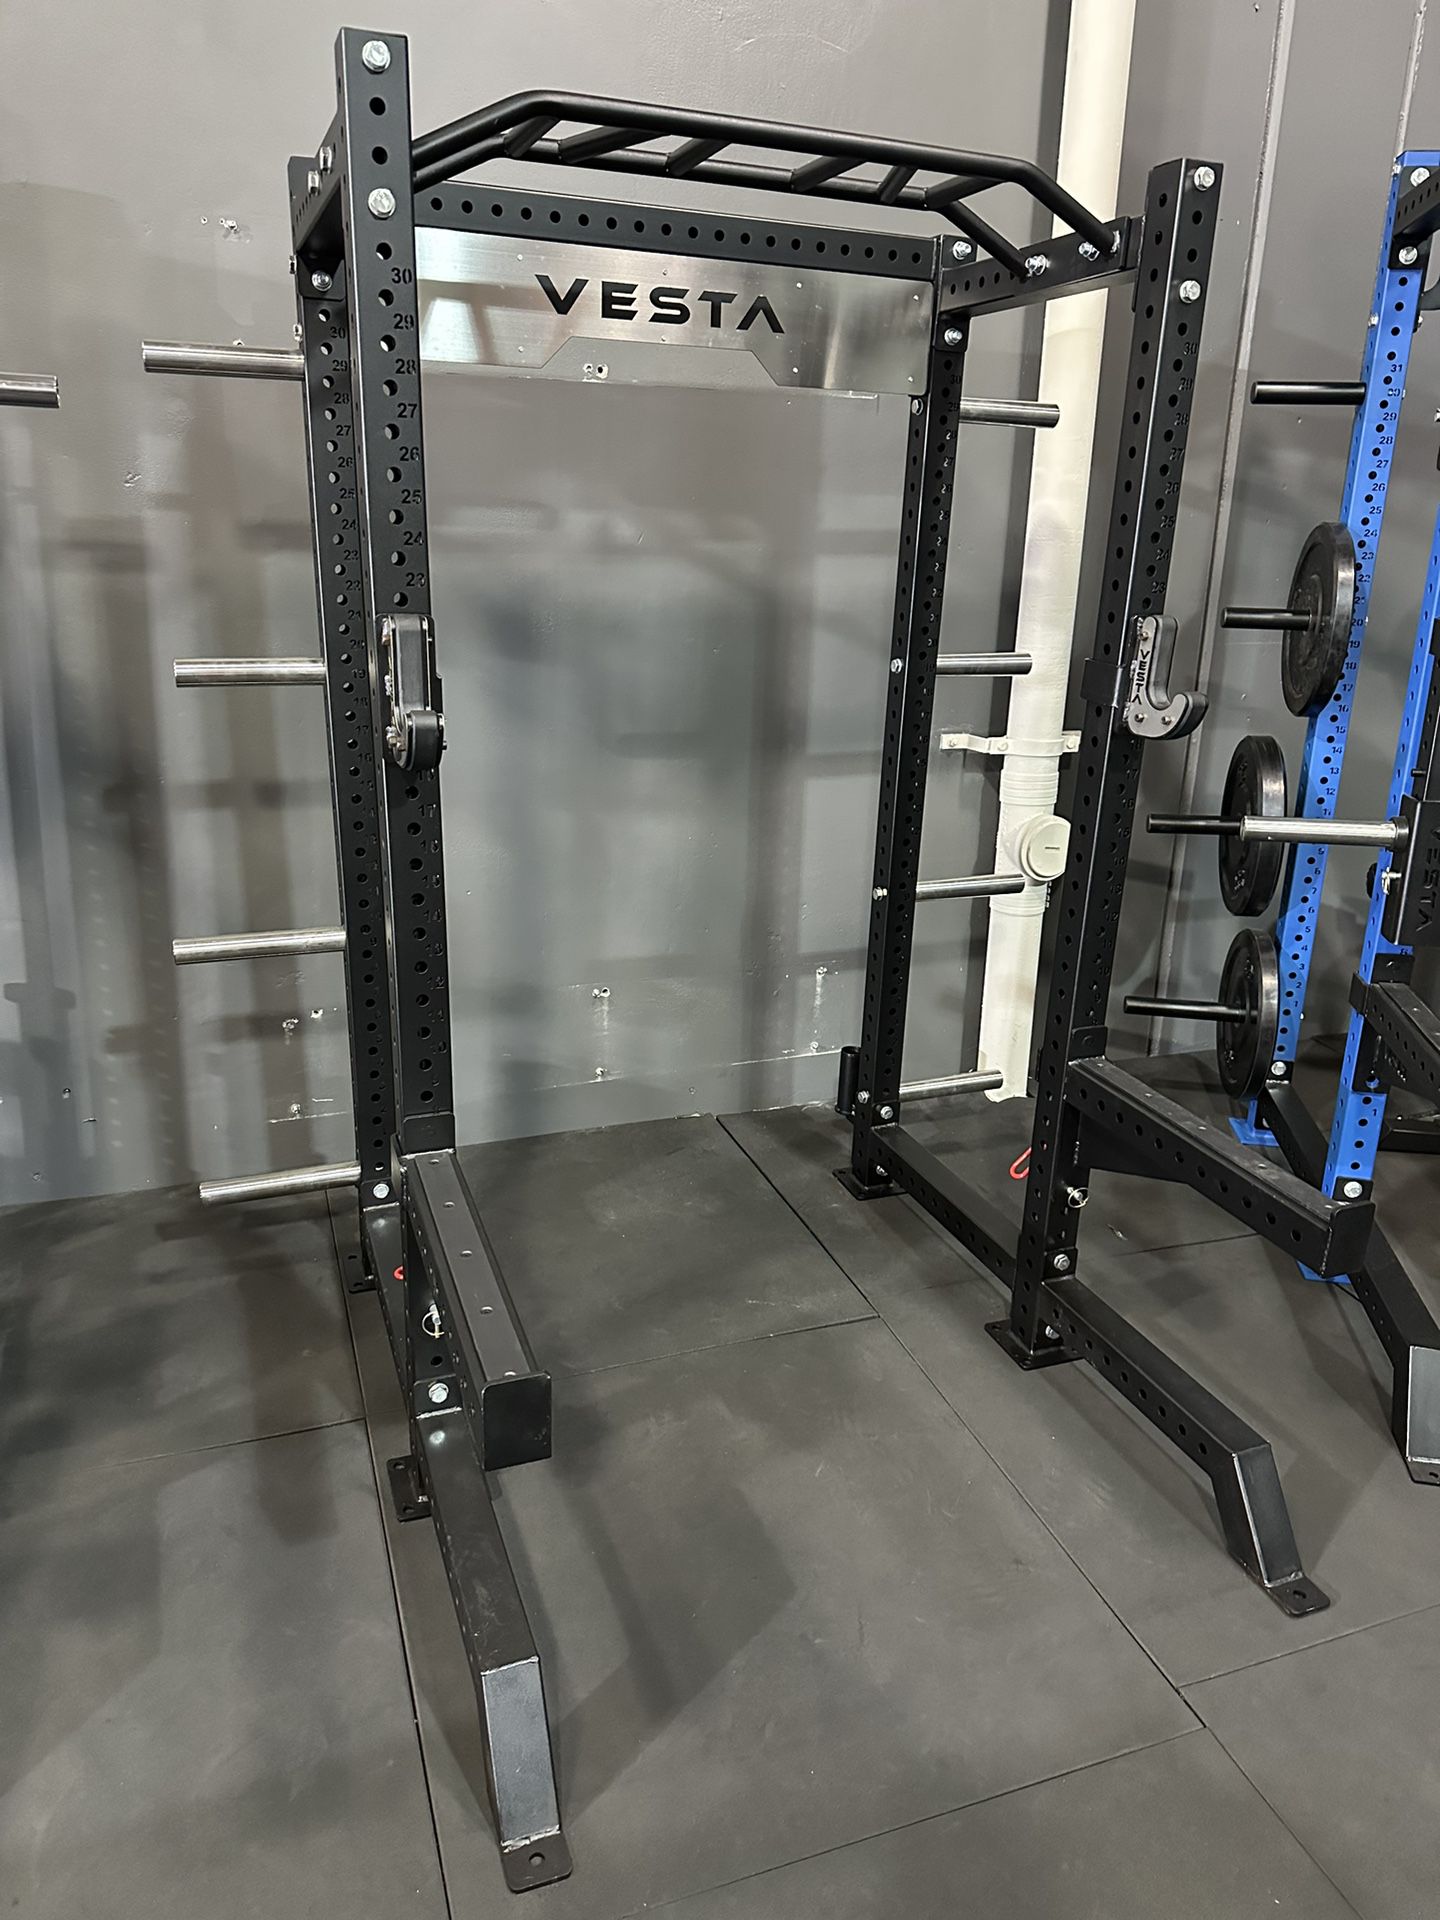 Vesta Fitness HR1000 | Adjustable Bench | 230lb Bumpers Olympic Weight | 7ft Olympic Barbell | Fitness | Gym Equipment | FREE DELIVERY 🚚 